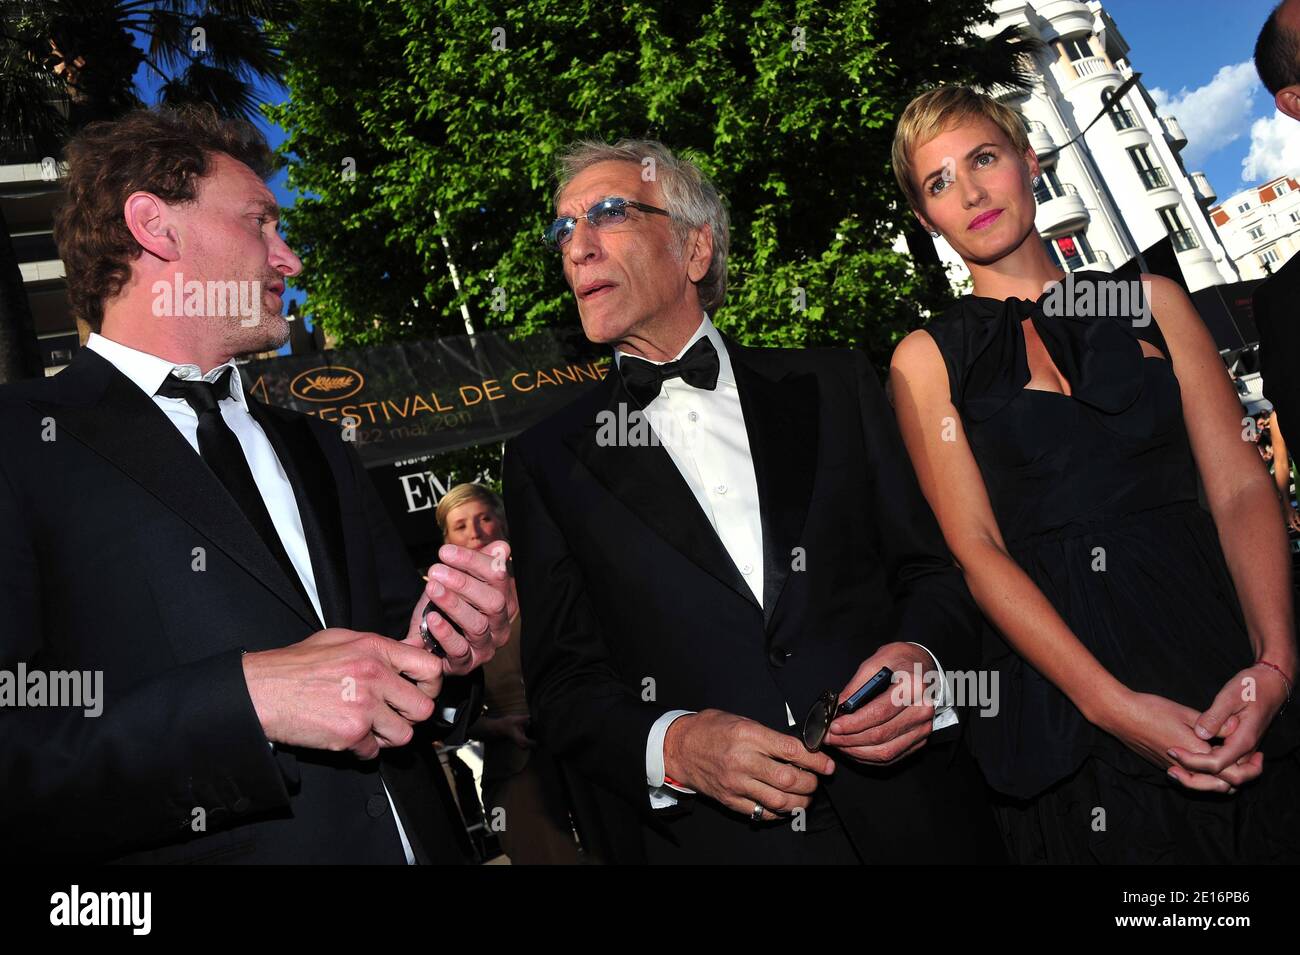 (L-R) Jean-Paul Rouve, Gerard Darmon and Judith Godreche arriving for the screening of 'The Artist' presented in competition in the Feature Films section as part of the 64th Cannes International Film Festival, at the Palais des Festivals in Cannes, southern France on May 15, 2011. Photo by Hahn-Nebinger-Genin/ABACAPRESS.COM Stock Photo